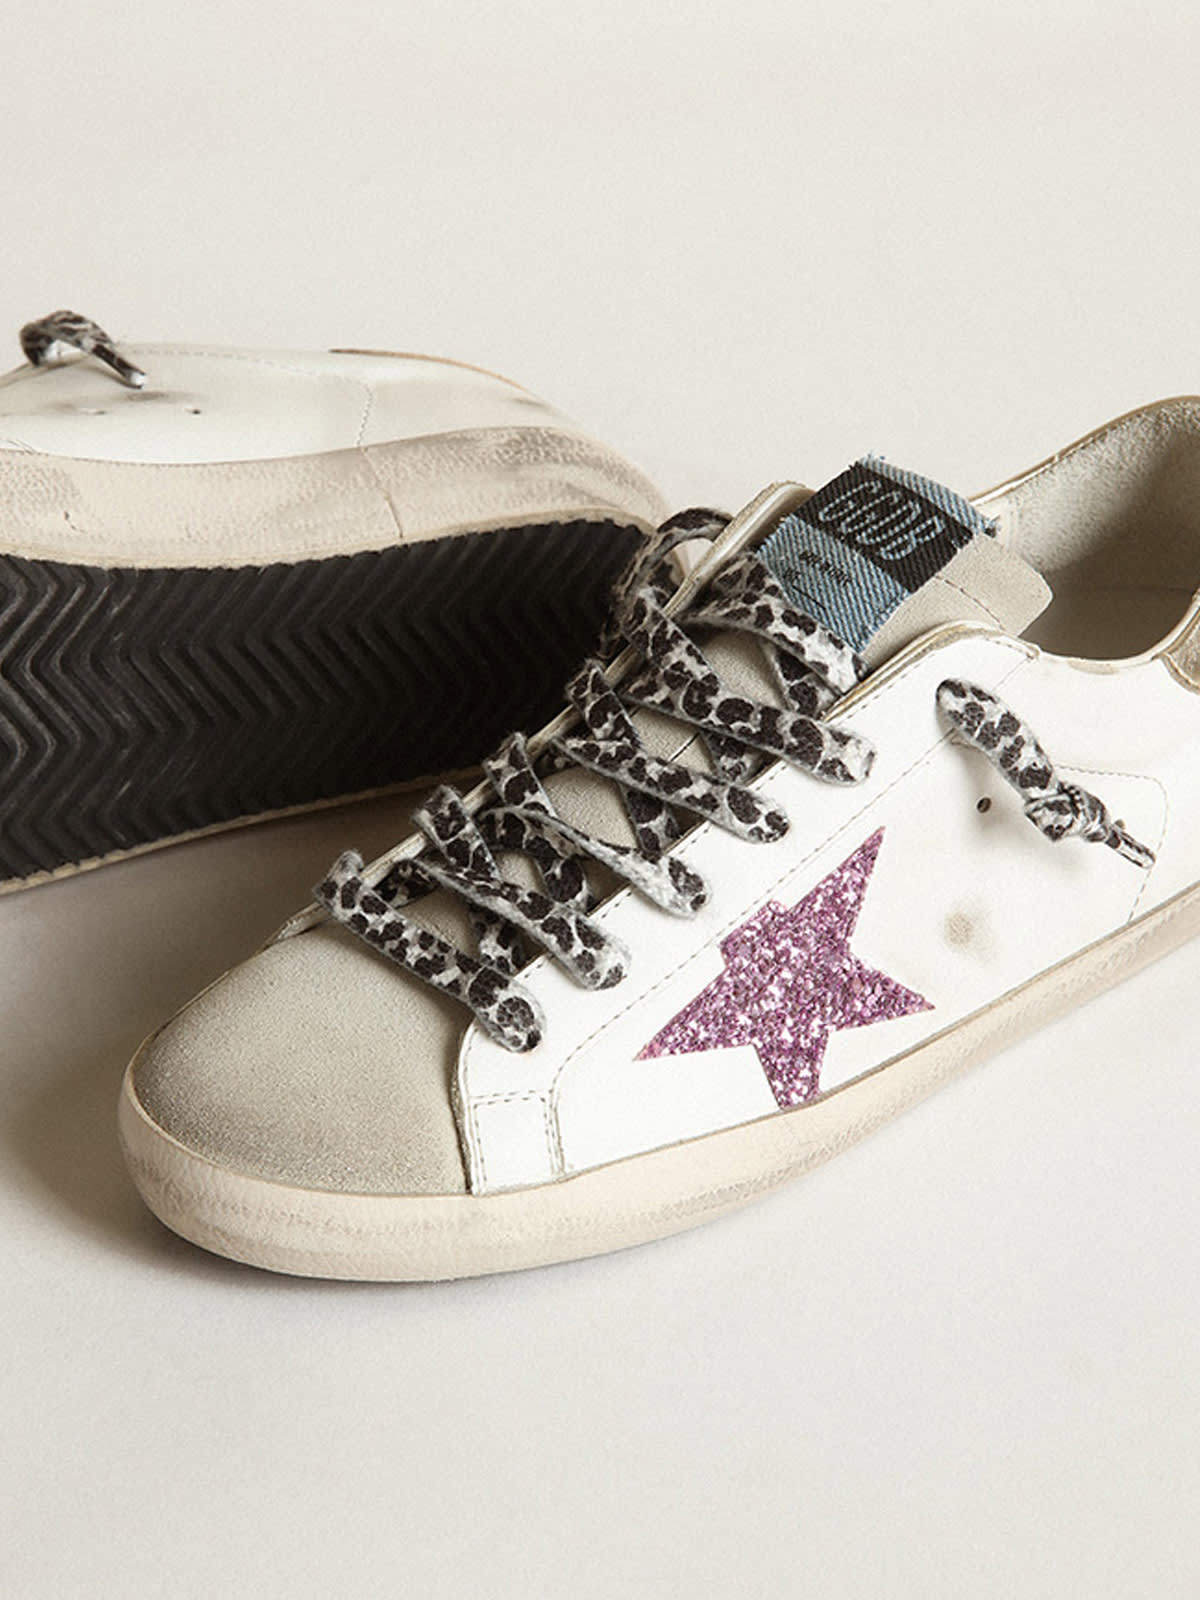 Golden Goose - Women's Super-Star with glitter and gold heel tab in 